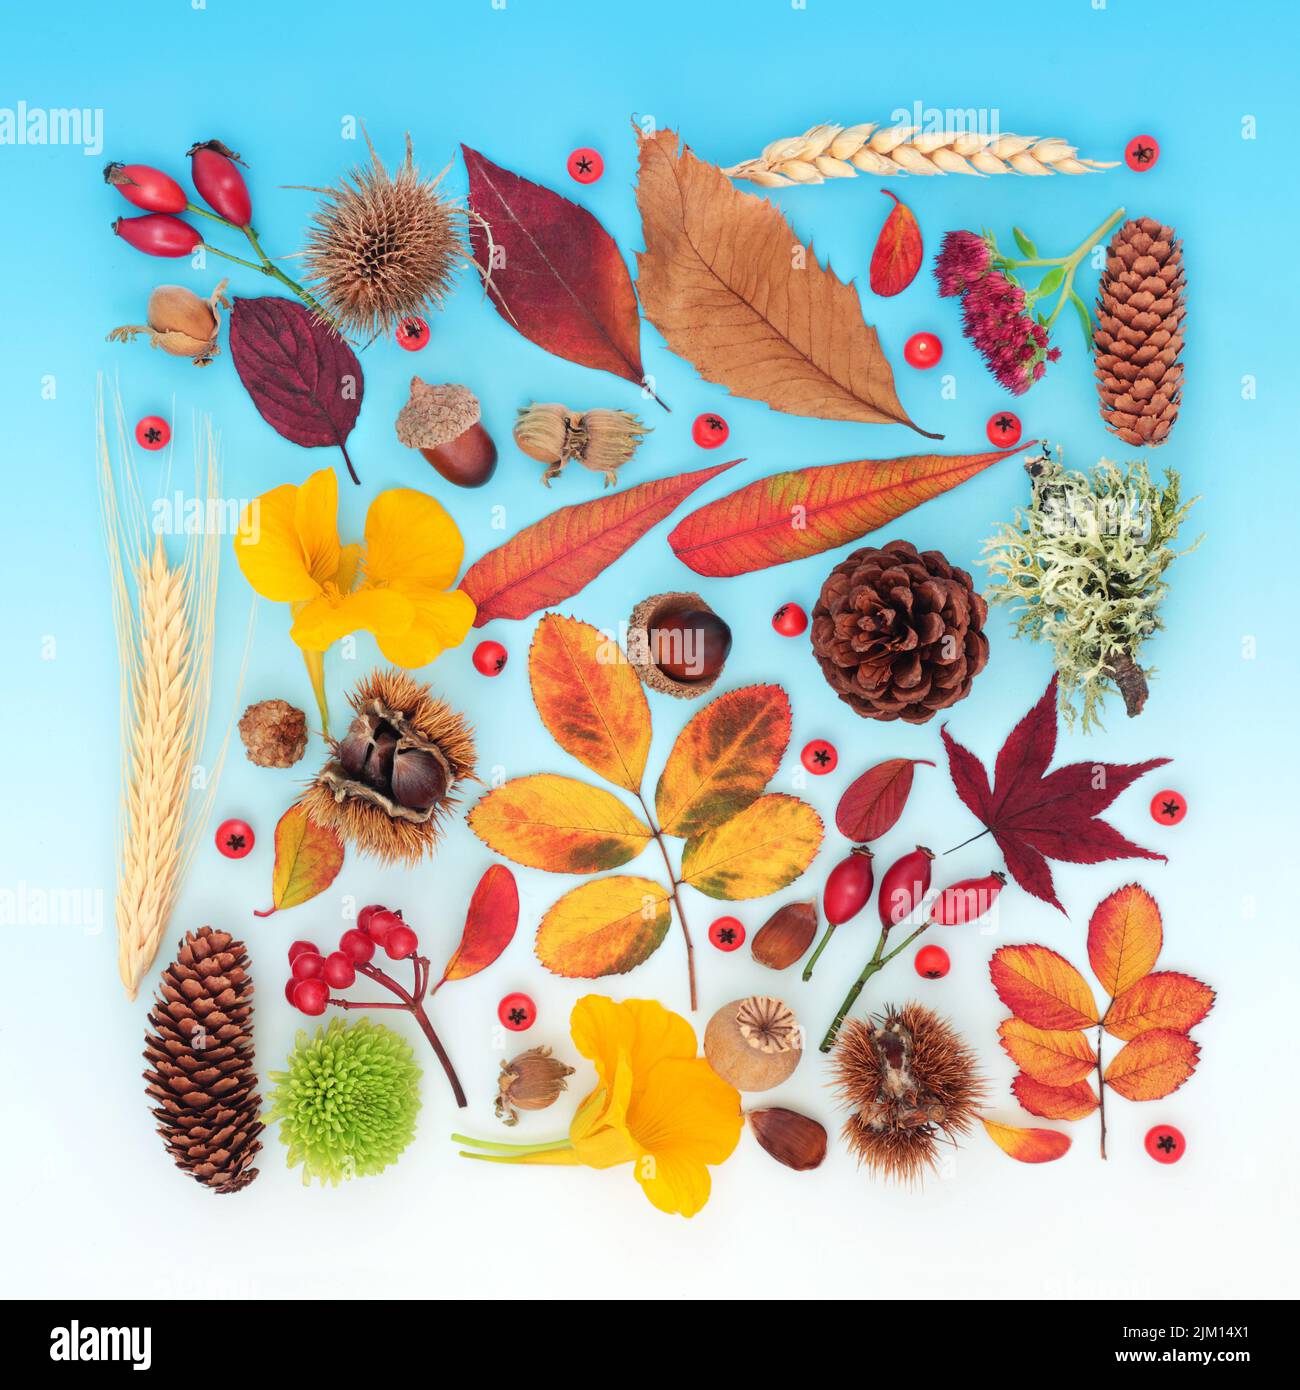 Symbols of Autumn abstract nature concept with leavers, flowers, nuts, red berry fruit. Thanksgiving Fall composition with natural flora. Stock Photo